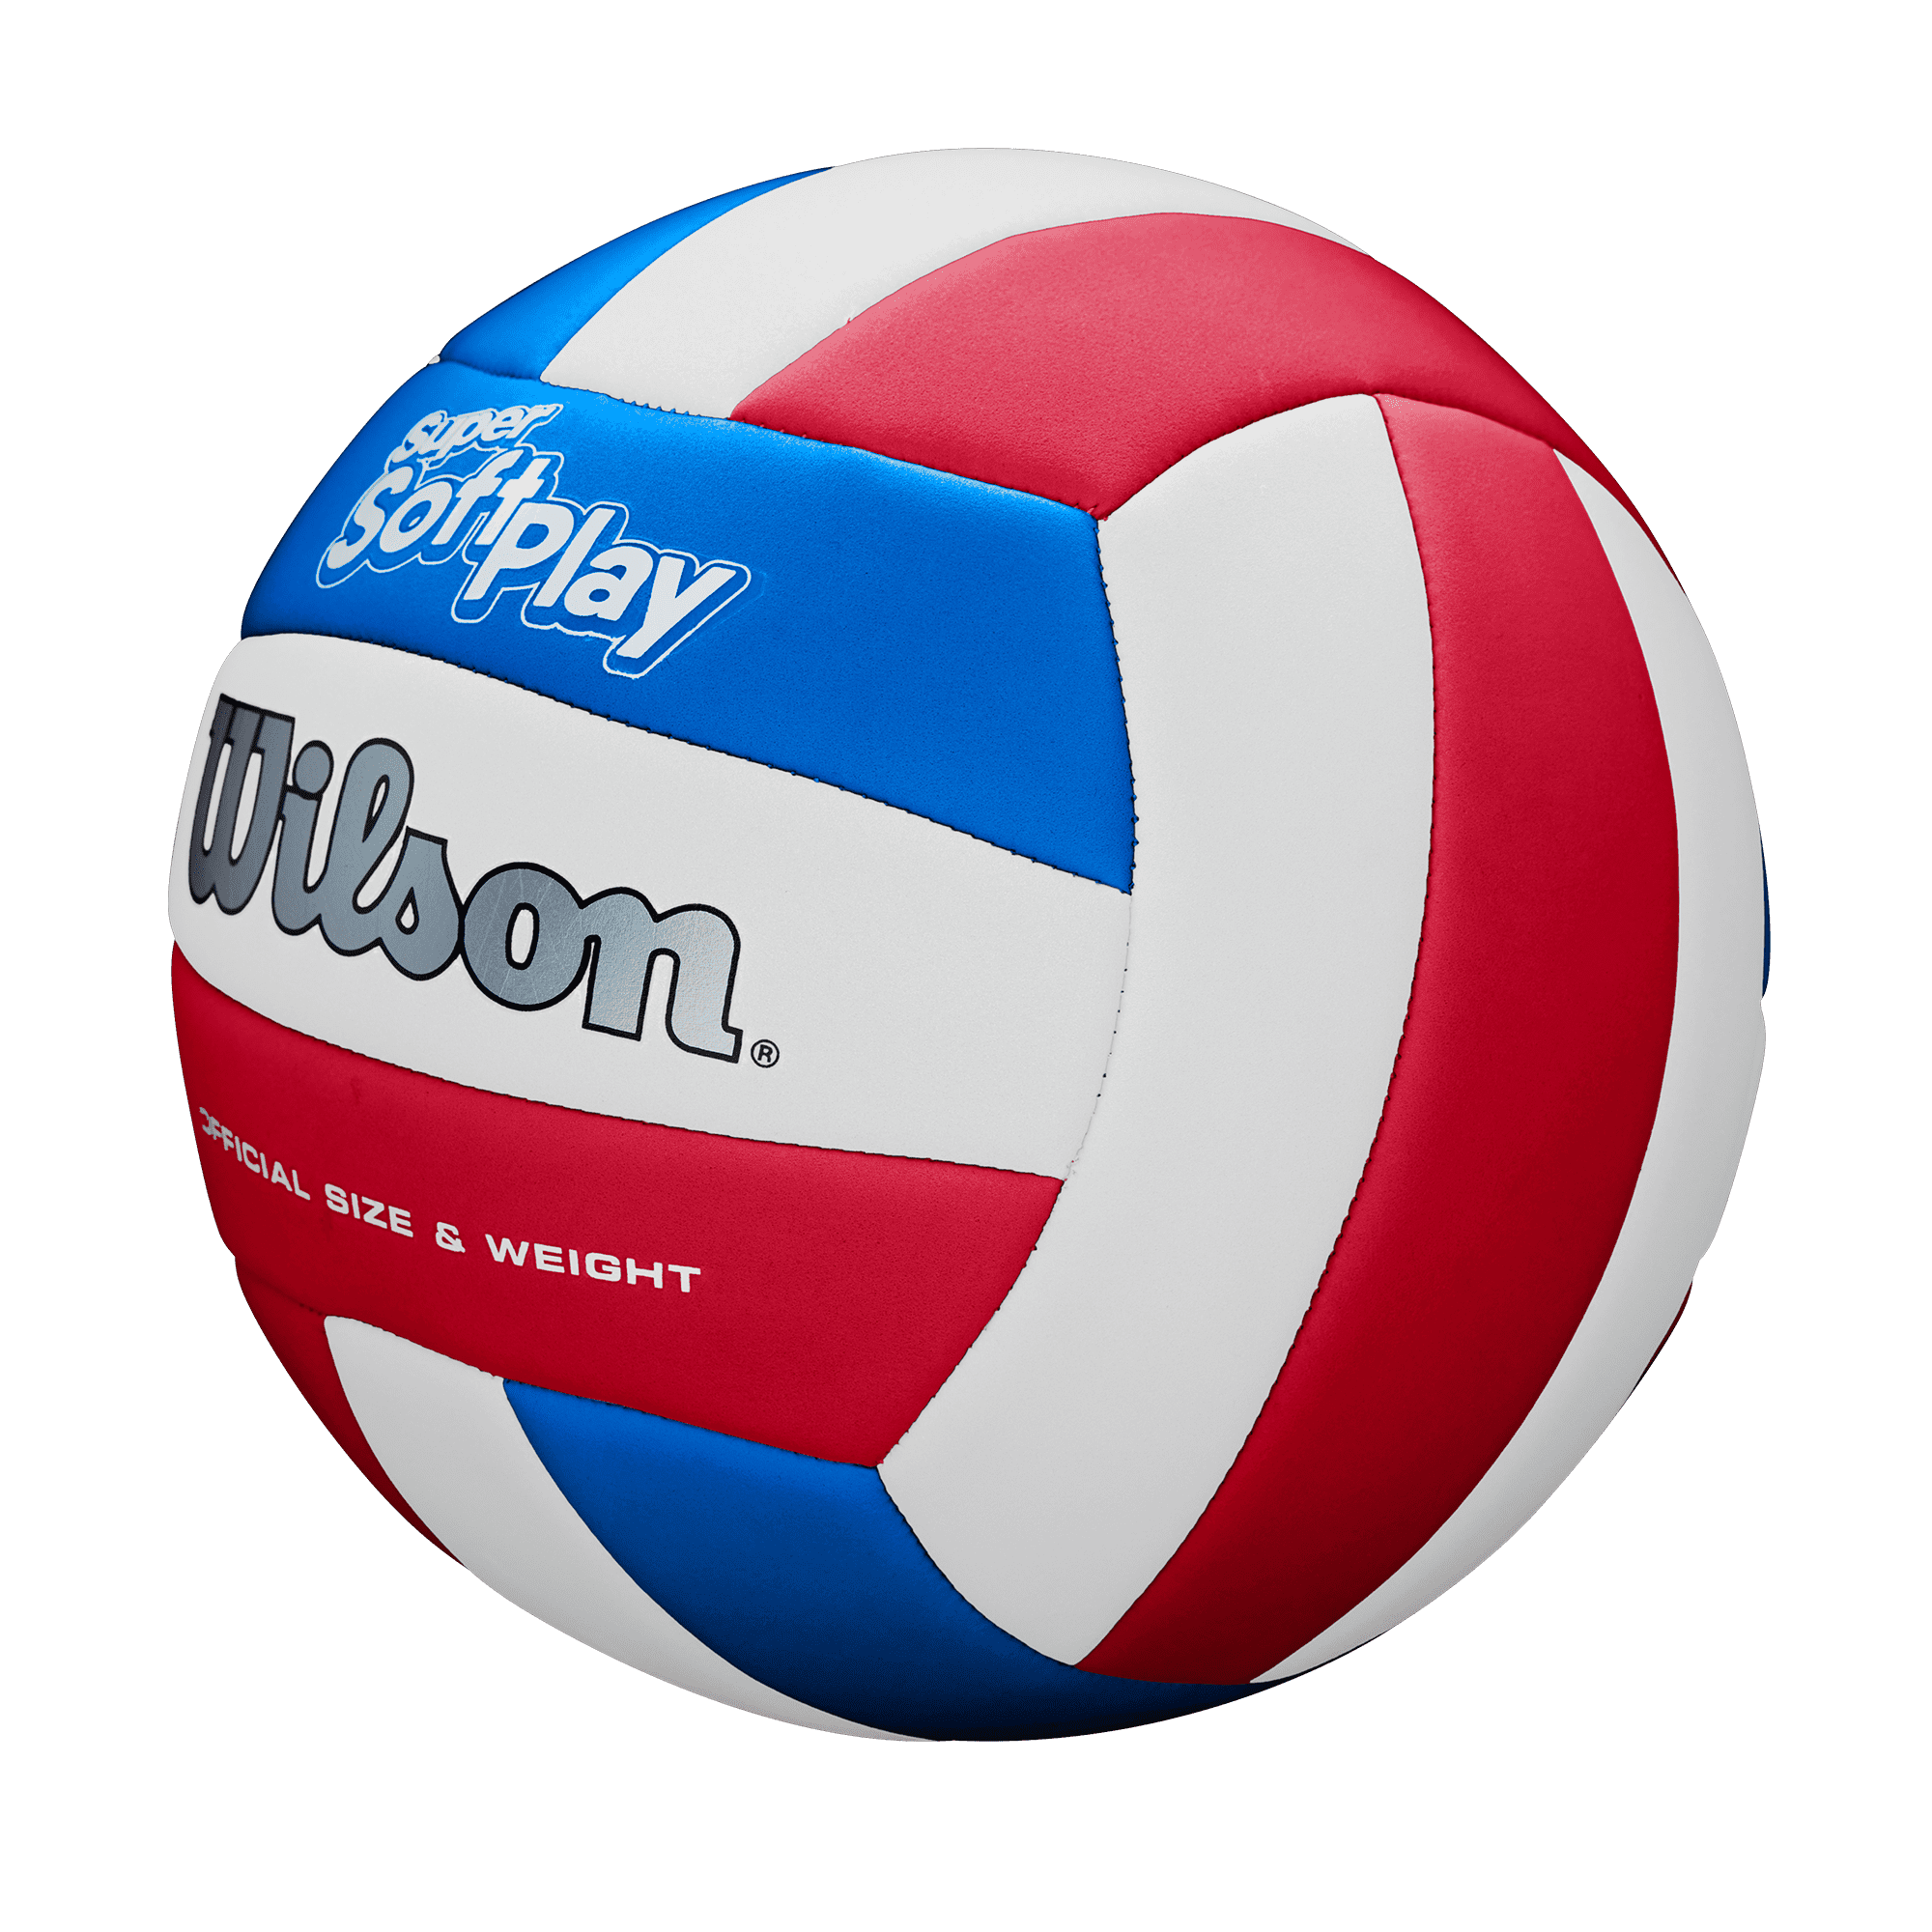 WILSON super soft play volleyball white/red/blue 